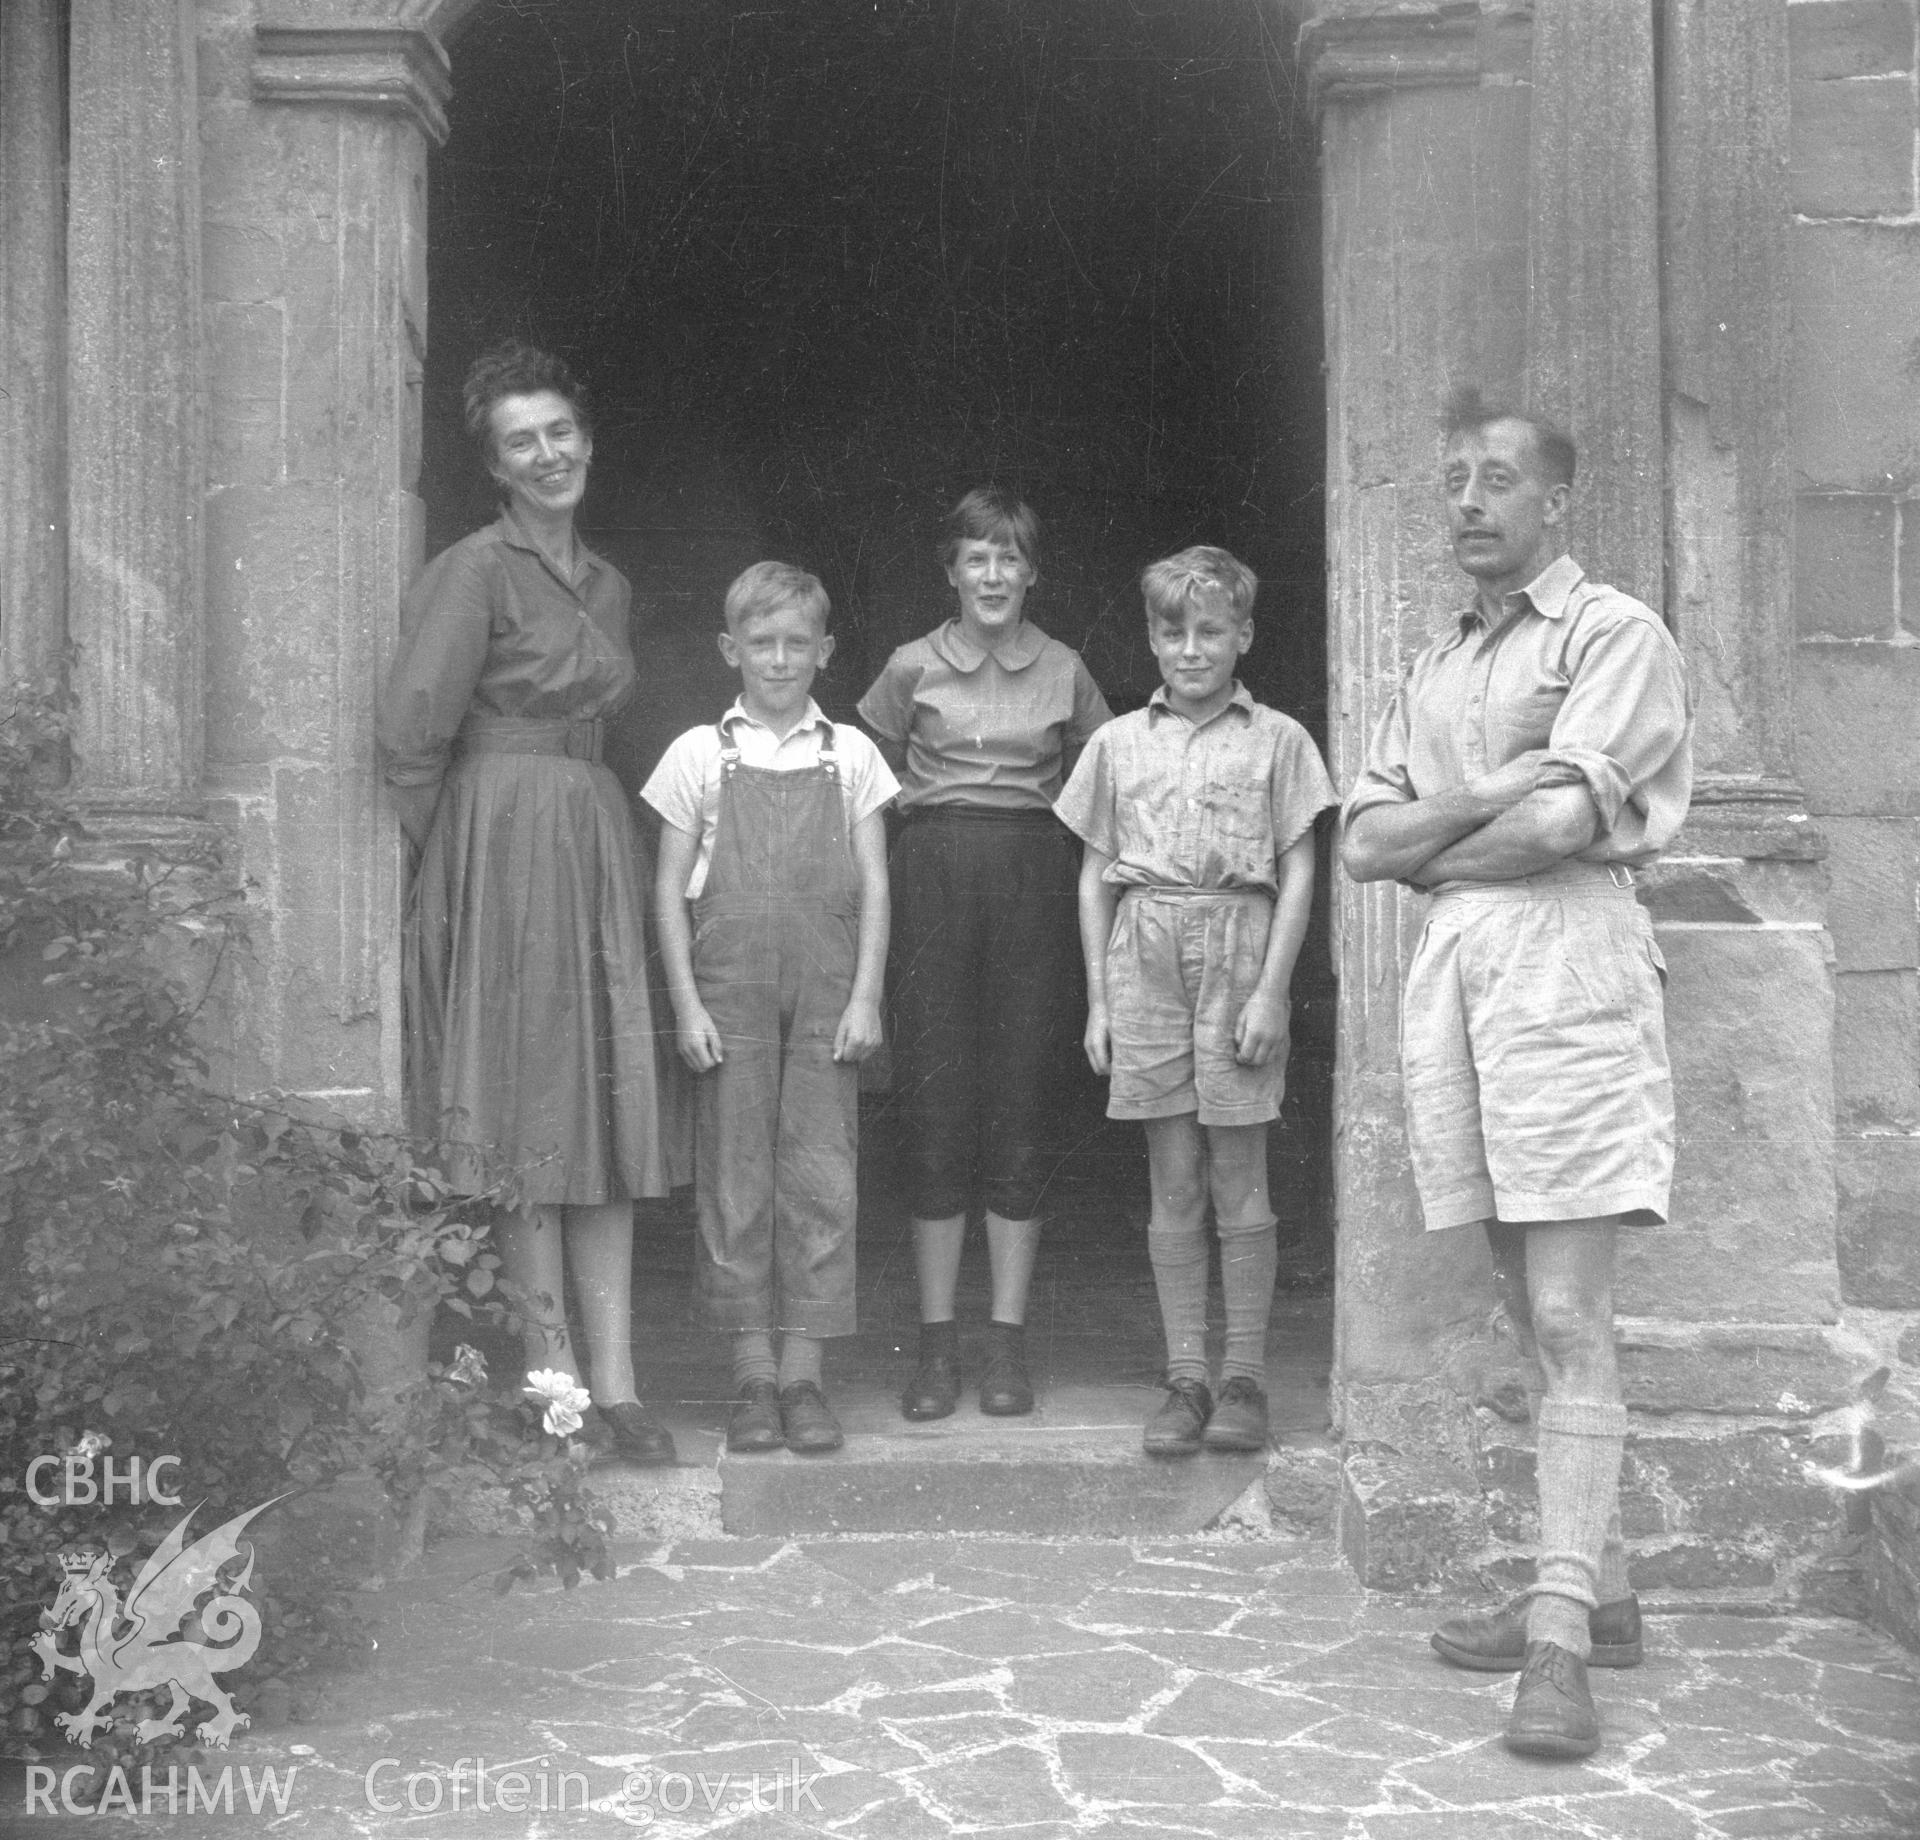 Digital copy of an undated nitrate negative showing a group portrait at Treowen, Monmouthshire.